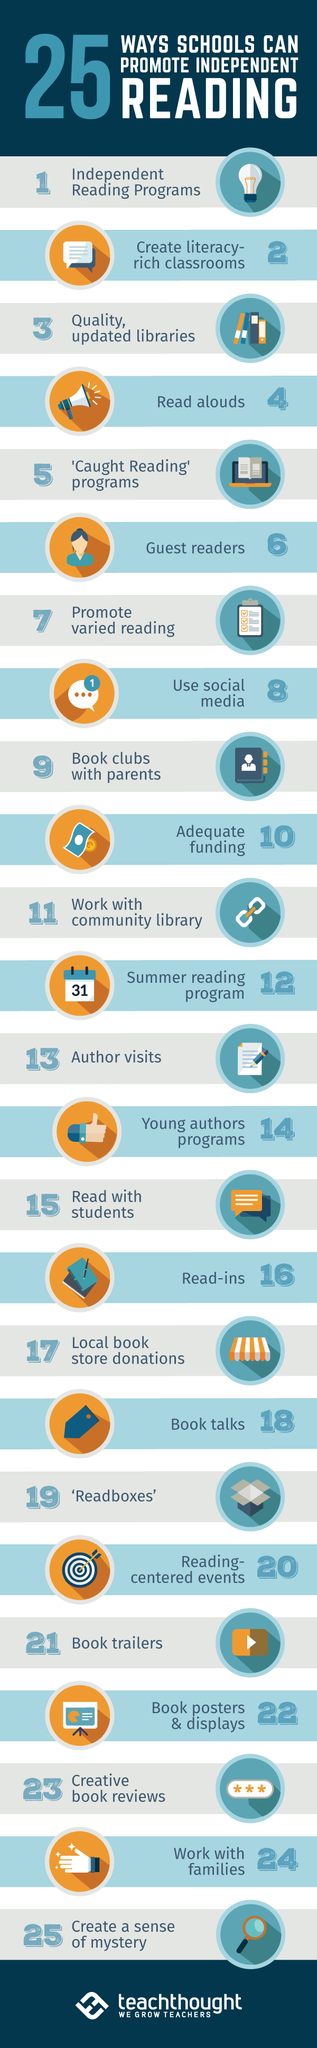 ways schools can promote independent reading